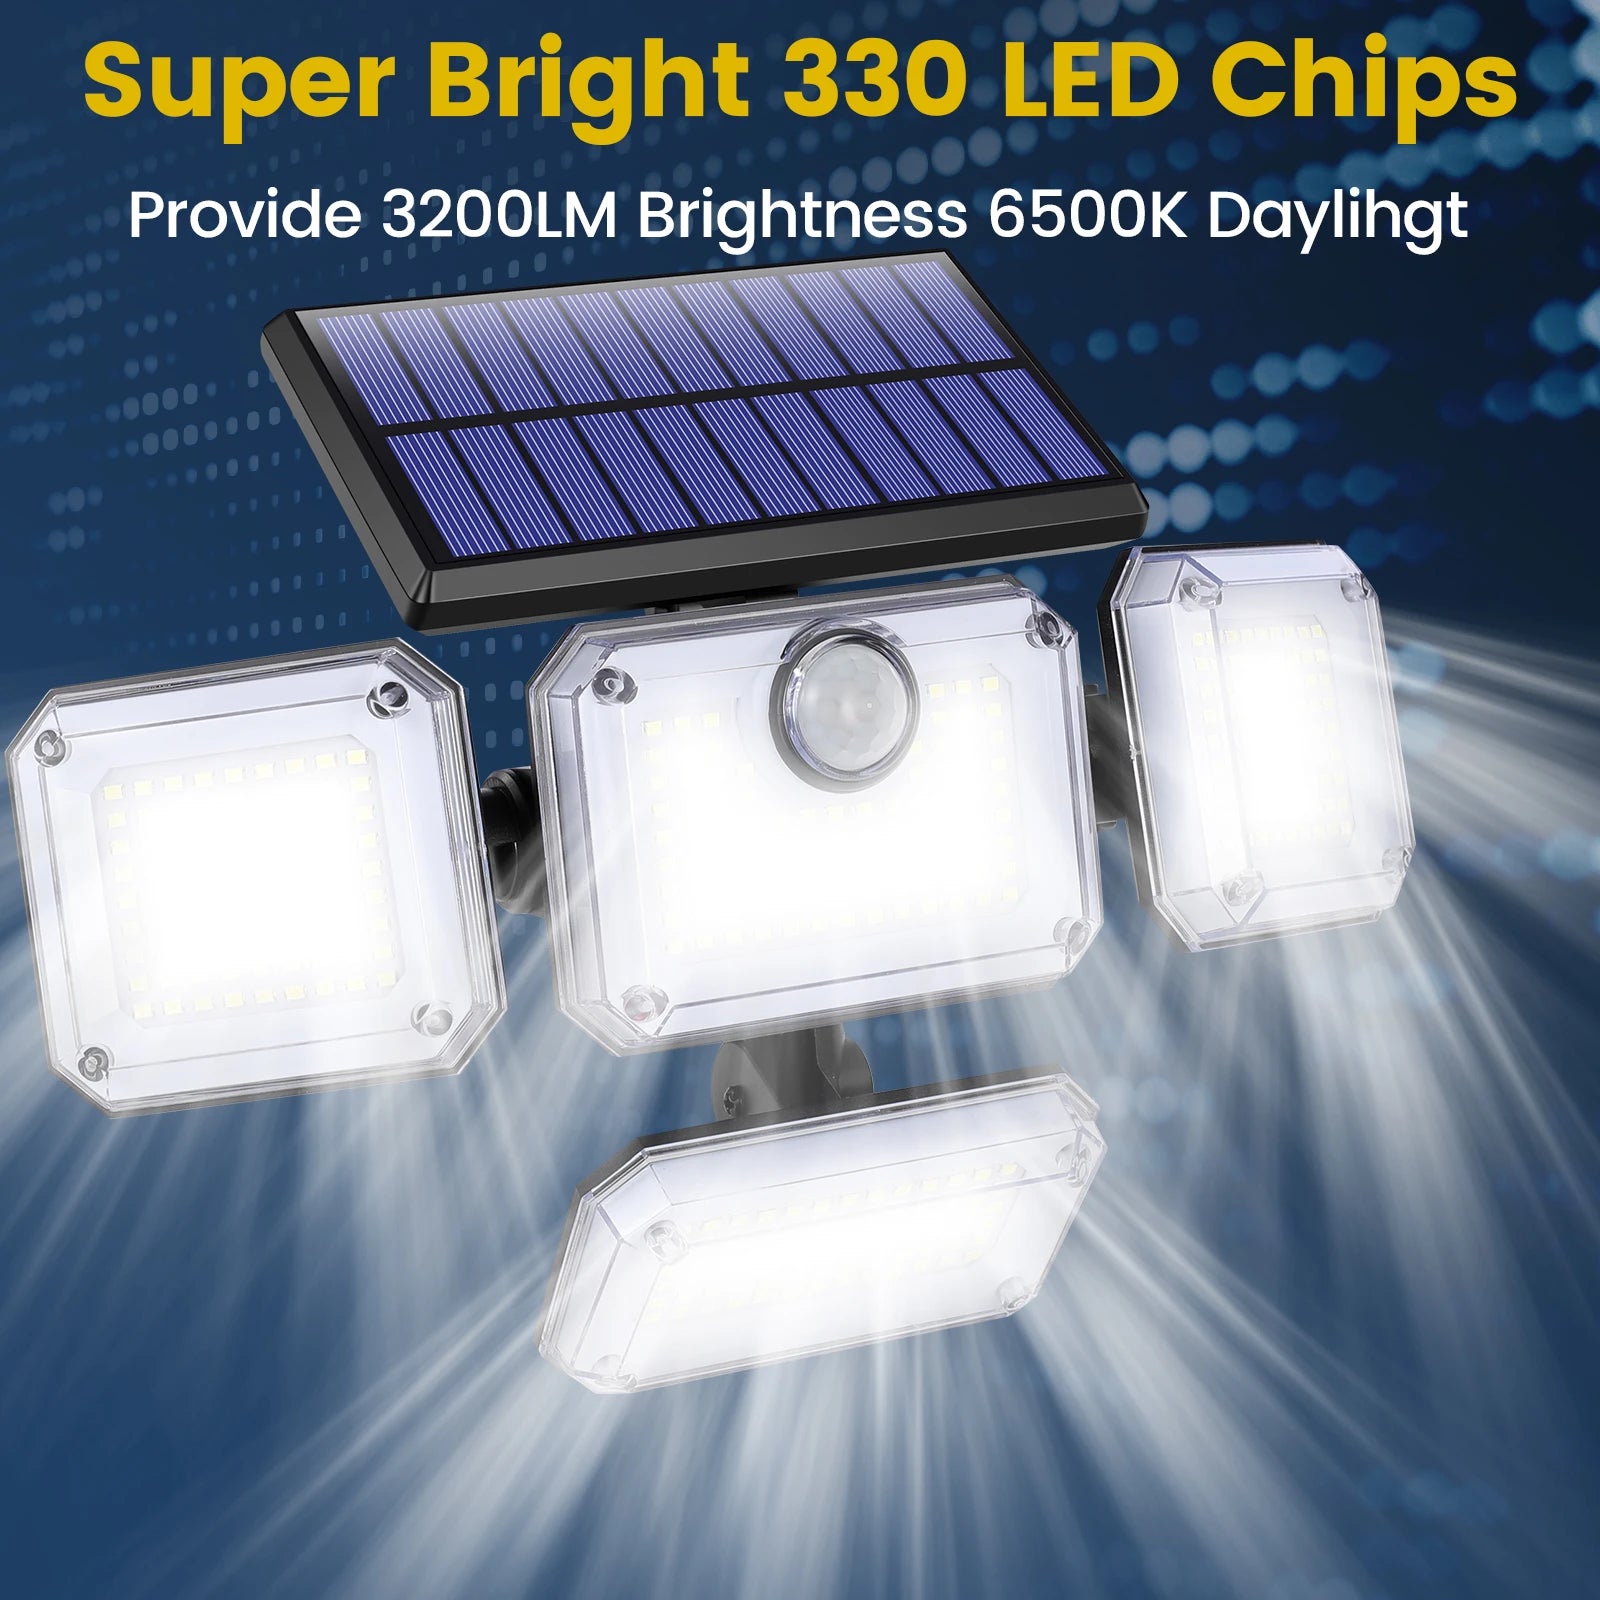 Solar Light, High-brightness LED lights with daylight color, perfect for bright illumination.